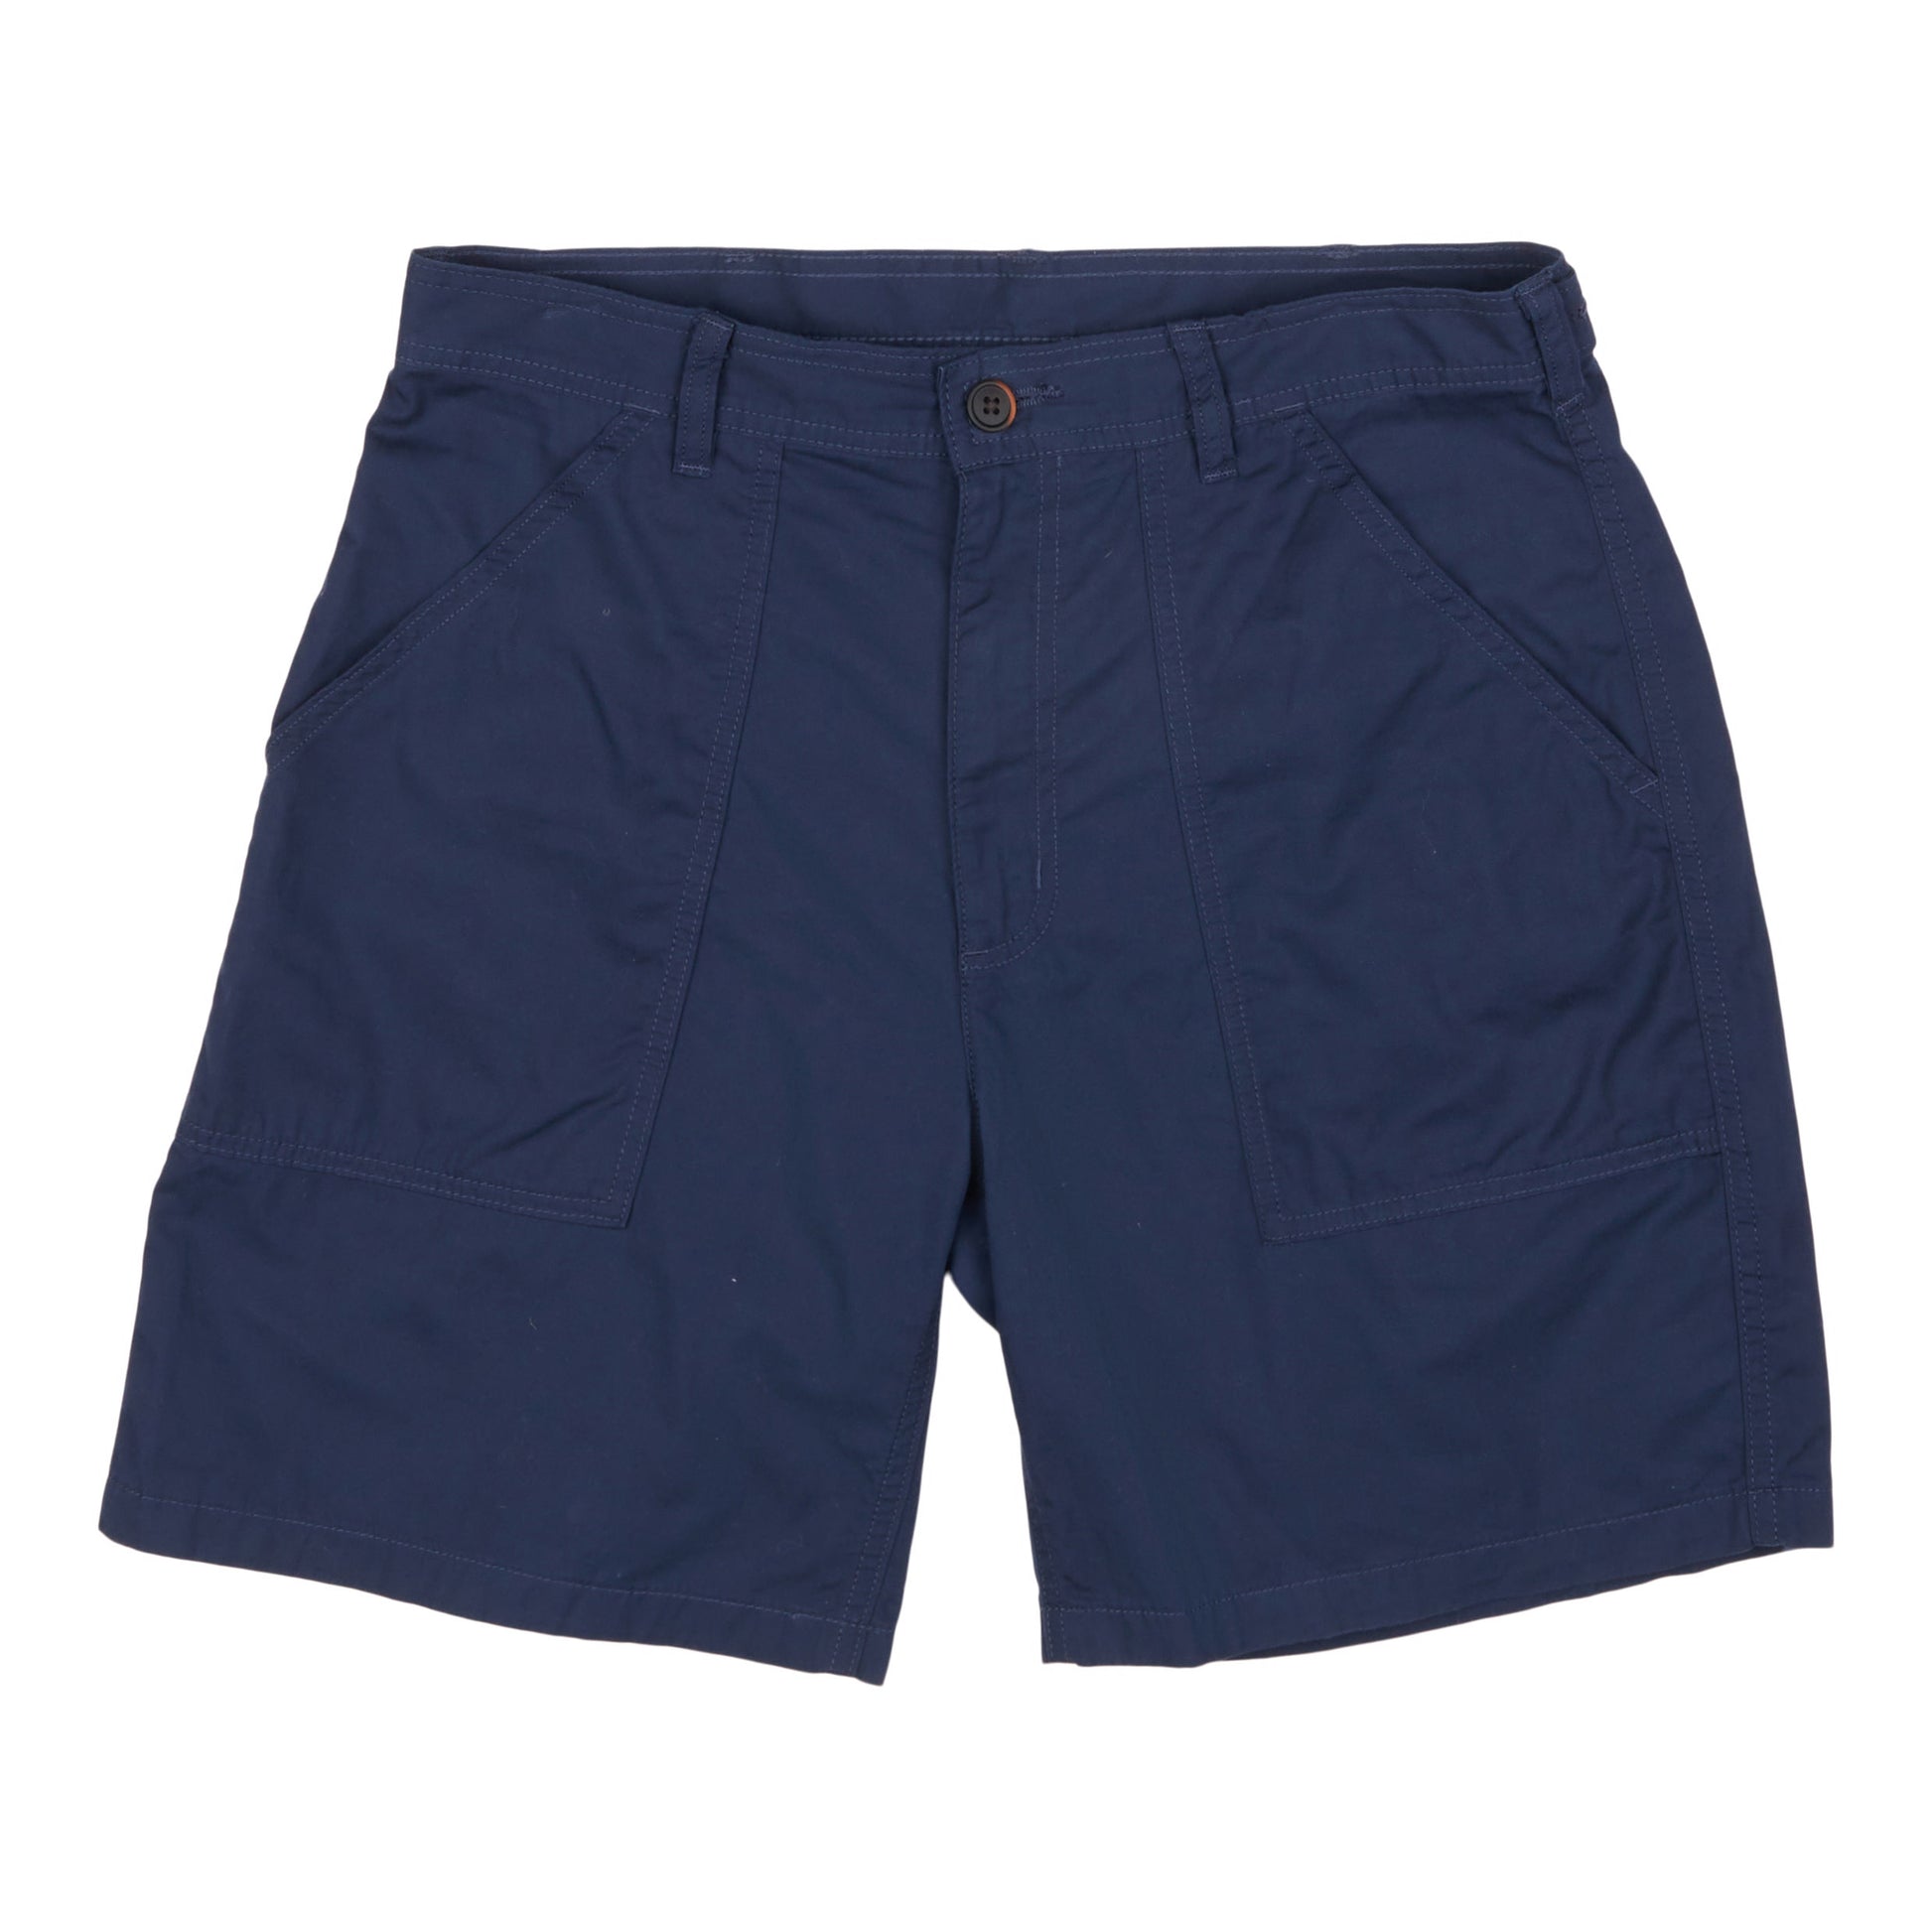 Shop the Latest in Men's Fashion Cotton Twill Shorts